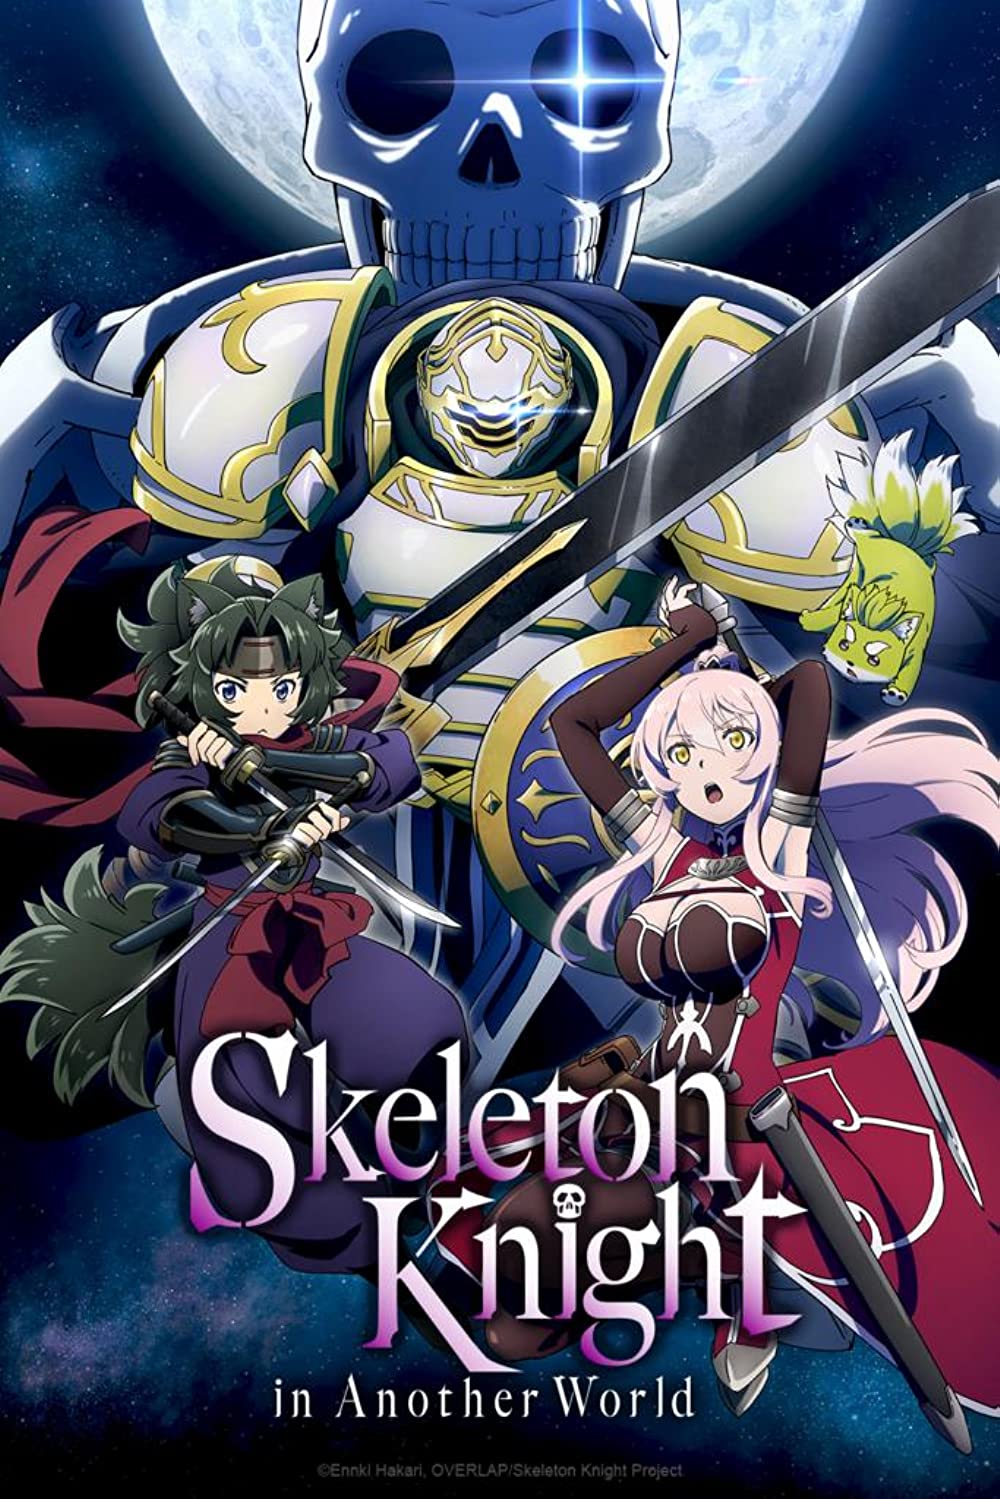 Skeleton Knight in Another World, Anime Voice-Over Wiki